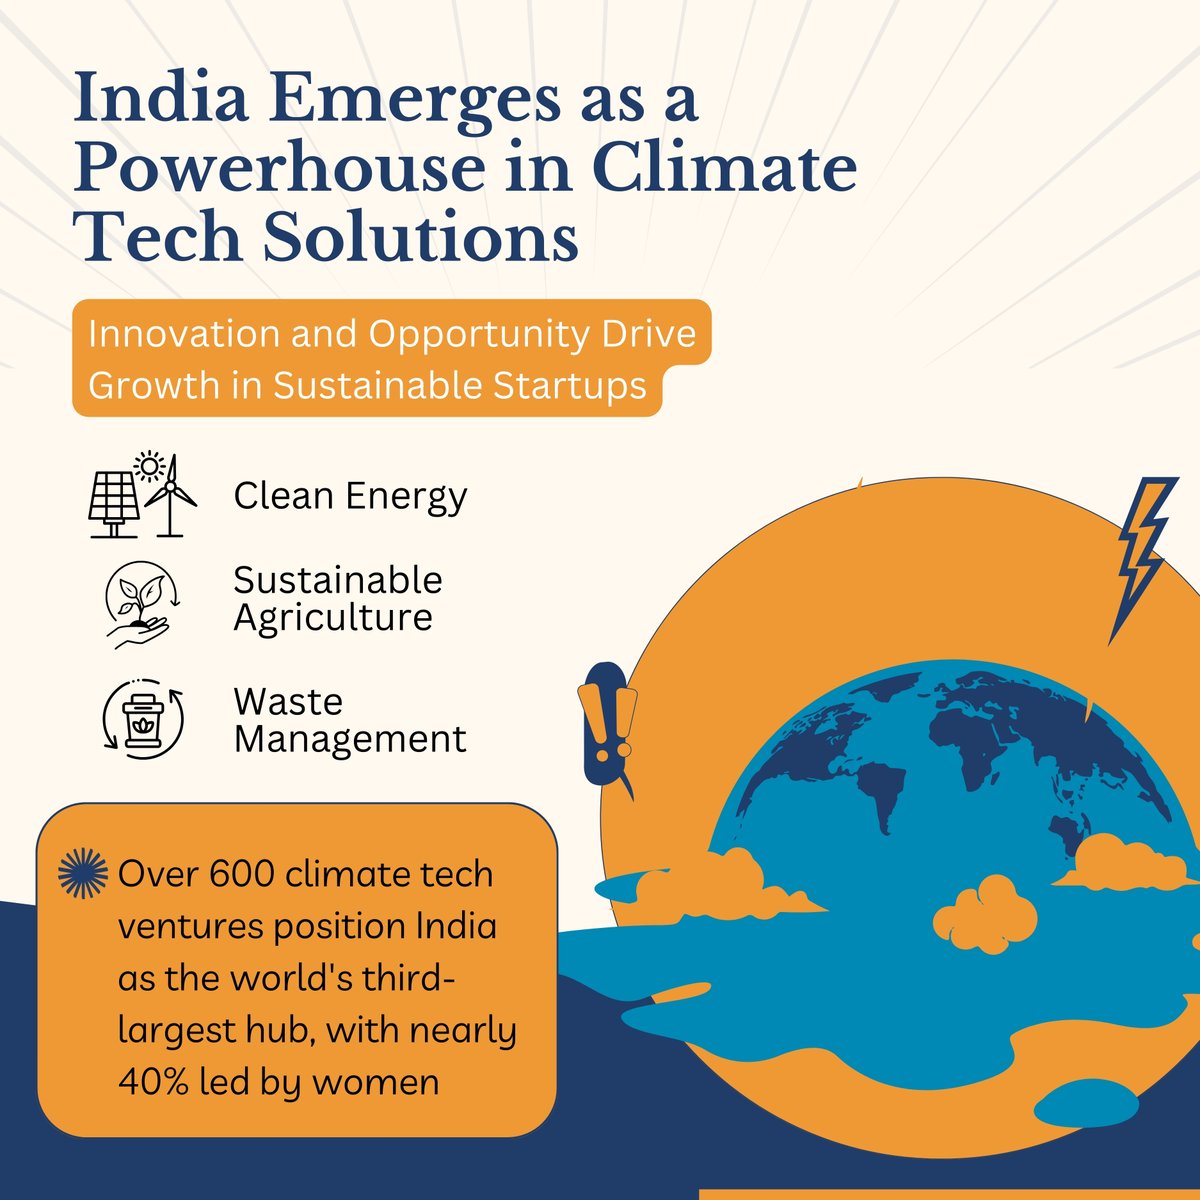 The fight against #climatechange gets a boost from #startups! #India, home to 600+ #climatetech ventures, ranks third globally. 40% led by #women, showcasing #inclusivity and #sustainability [Source: The Economic Times]. 

#Cleanenergy #SustainableFuture